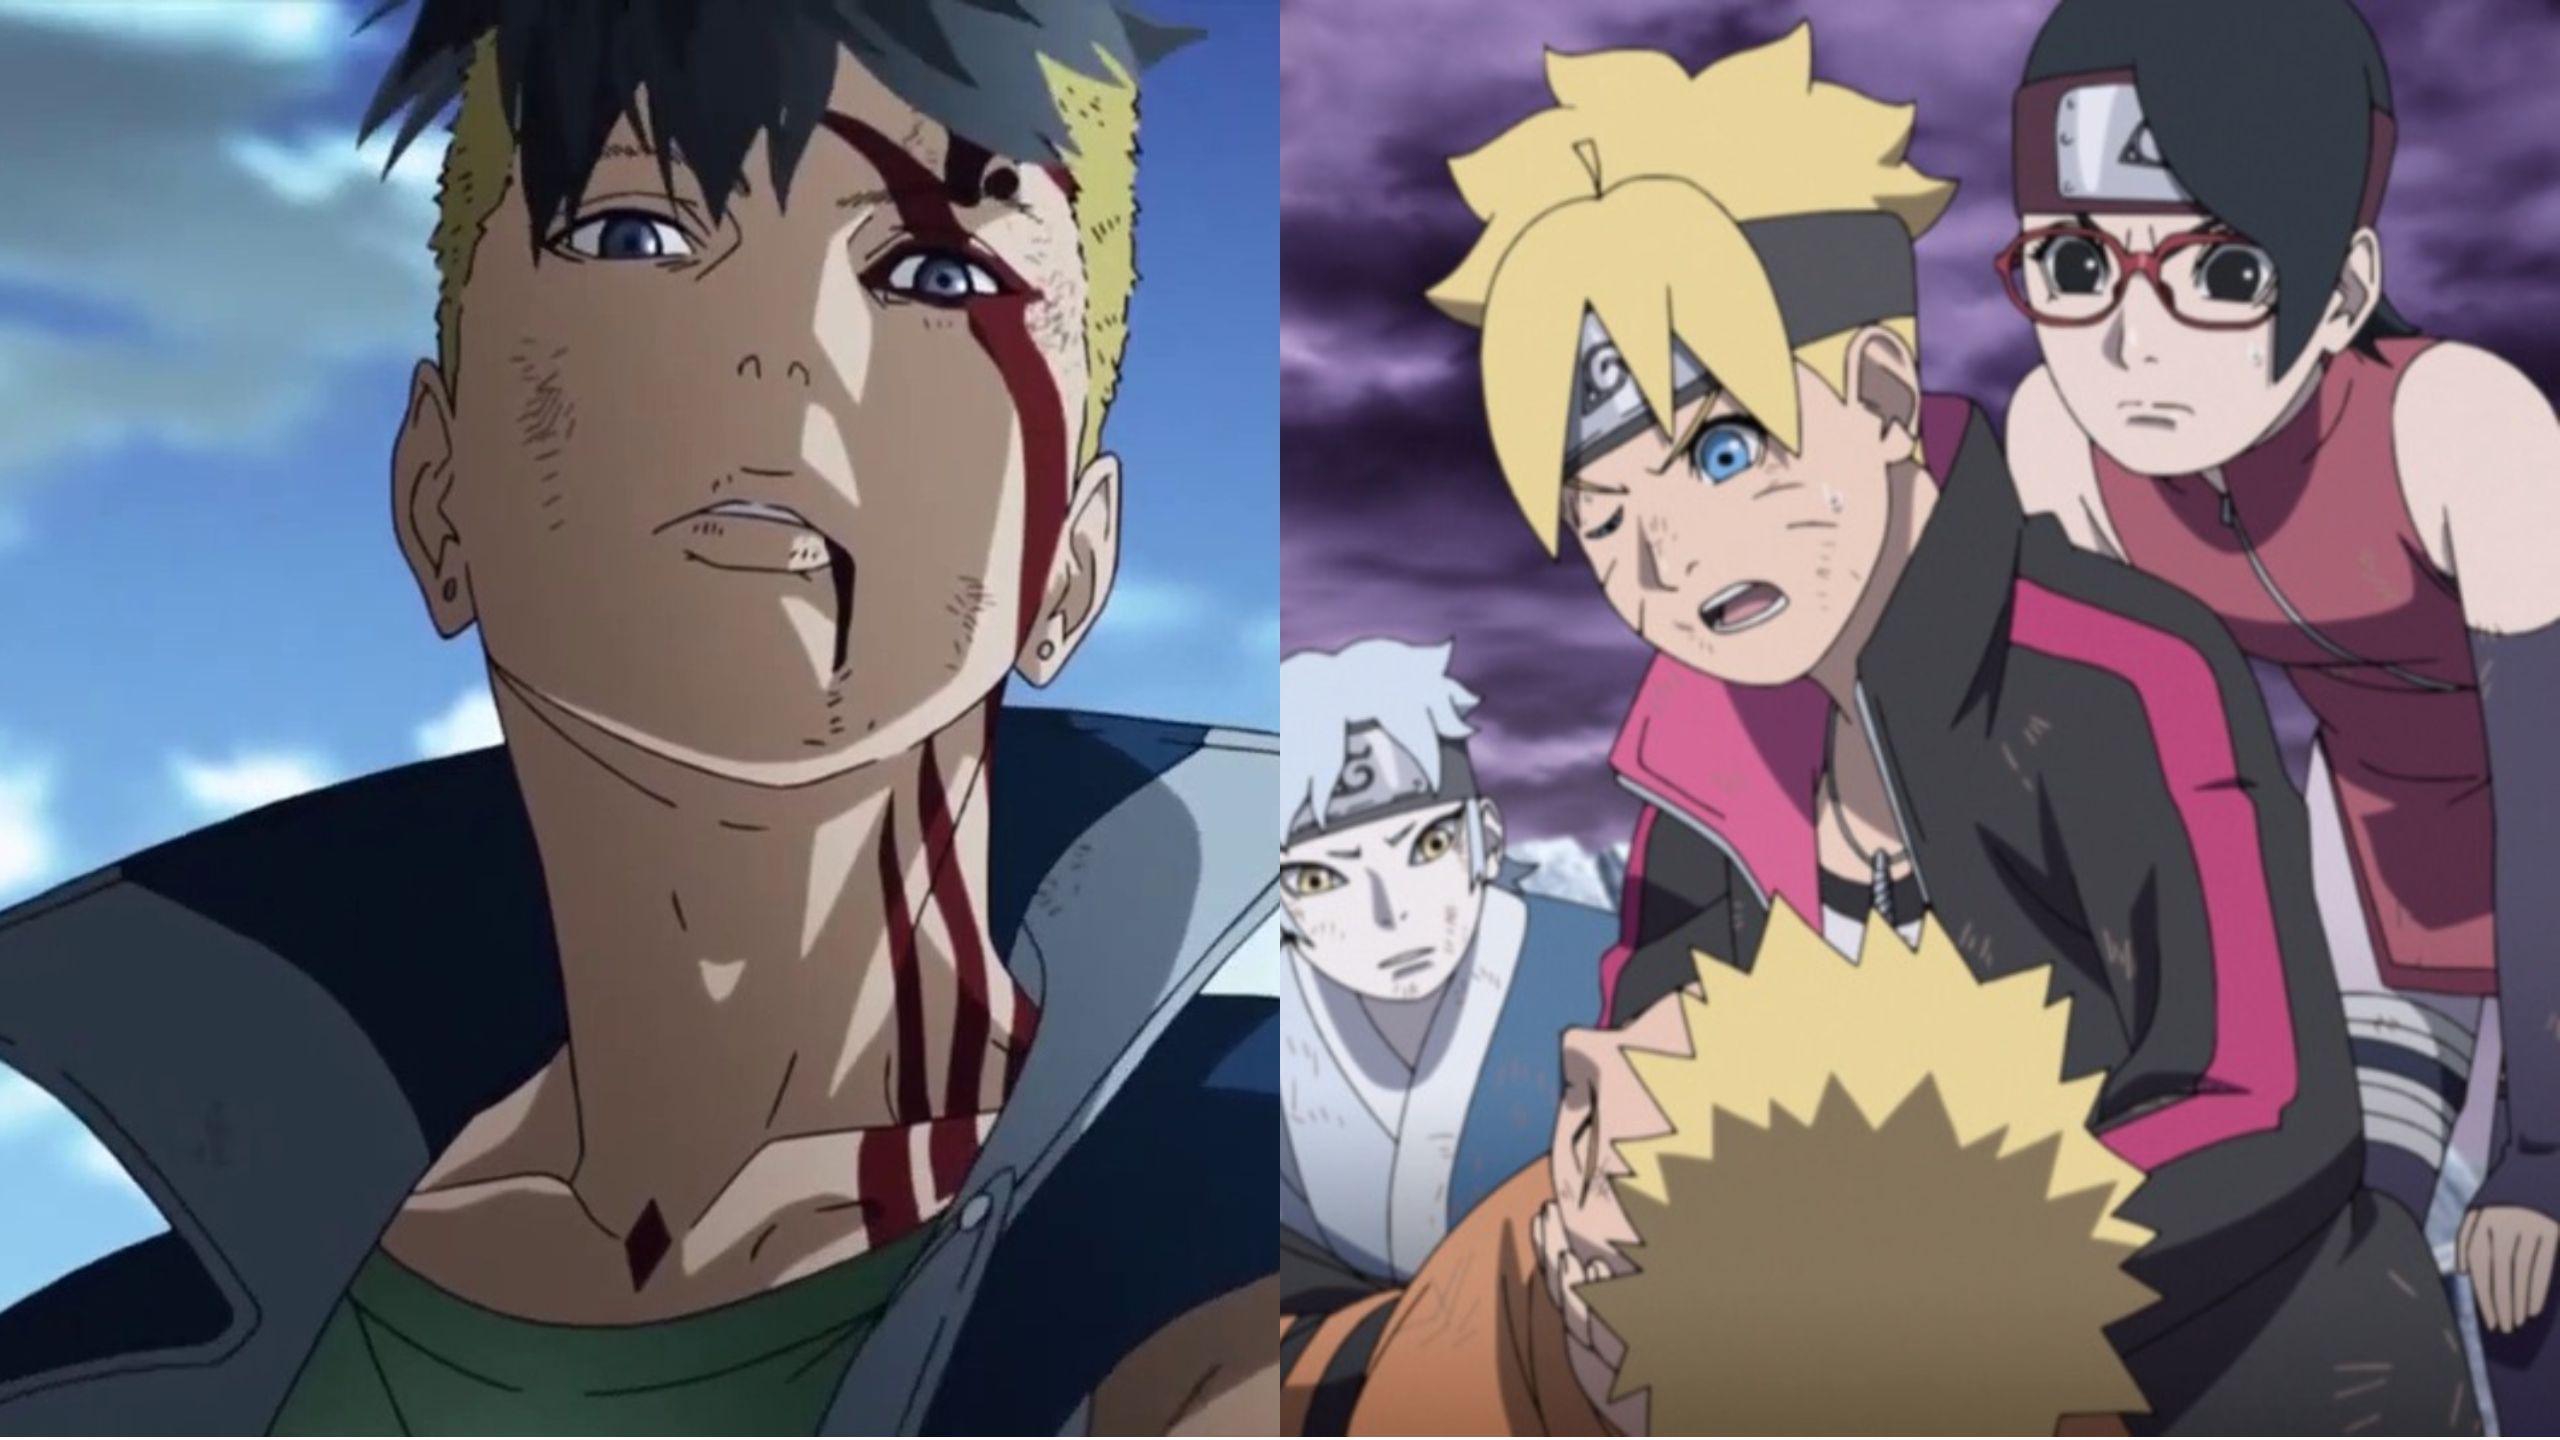 Boruto Anime Finale: English Dub Complete with Exclusive Features - VIZ Media's Exciting Box Set Arrives This August! - Don’t Miss Out!